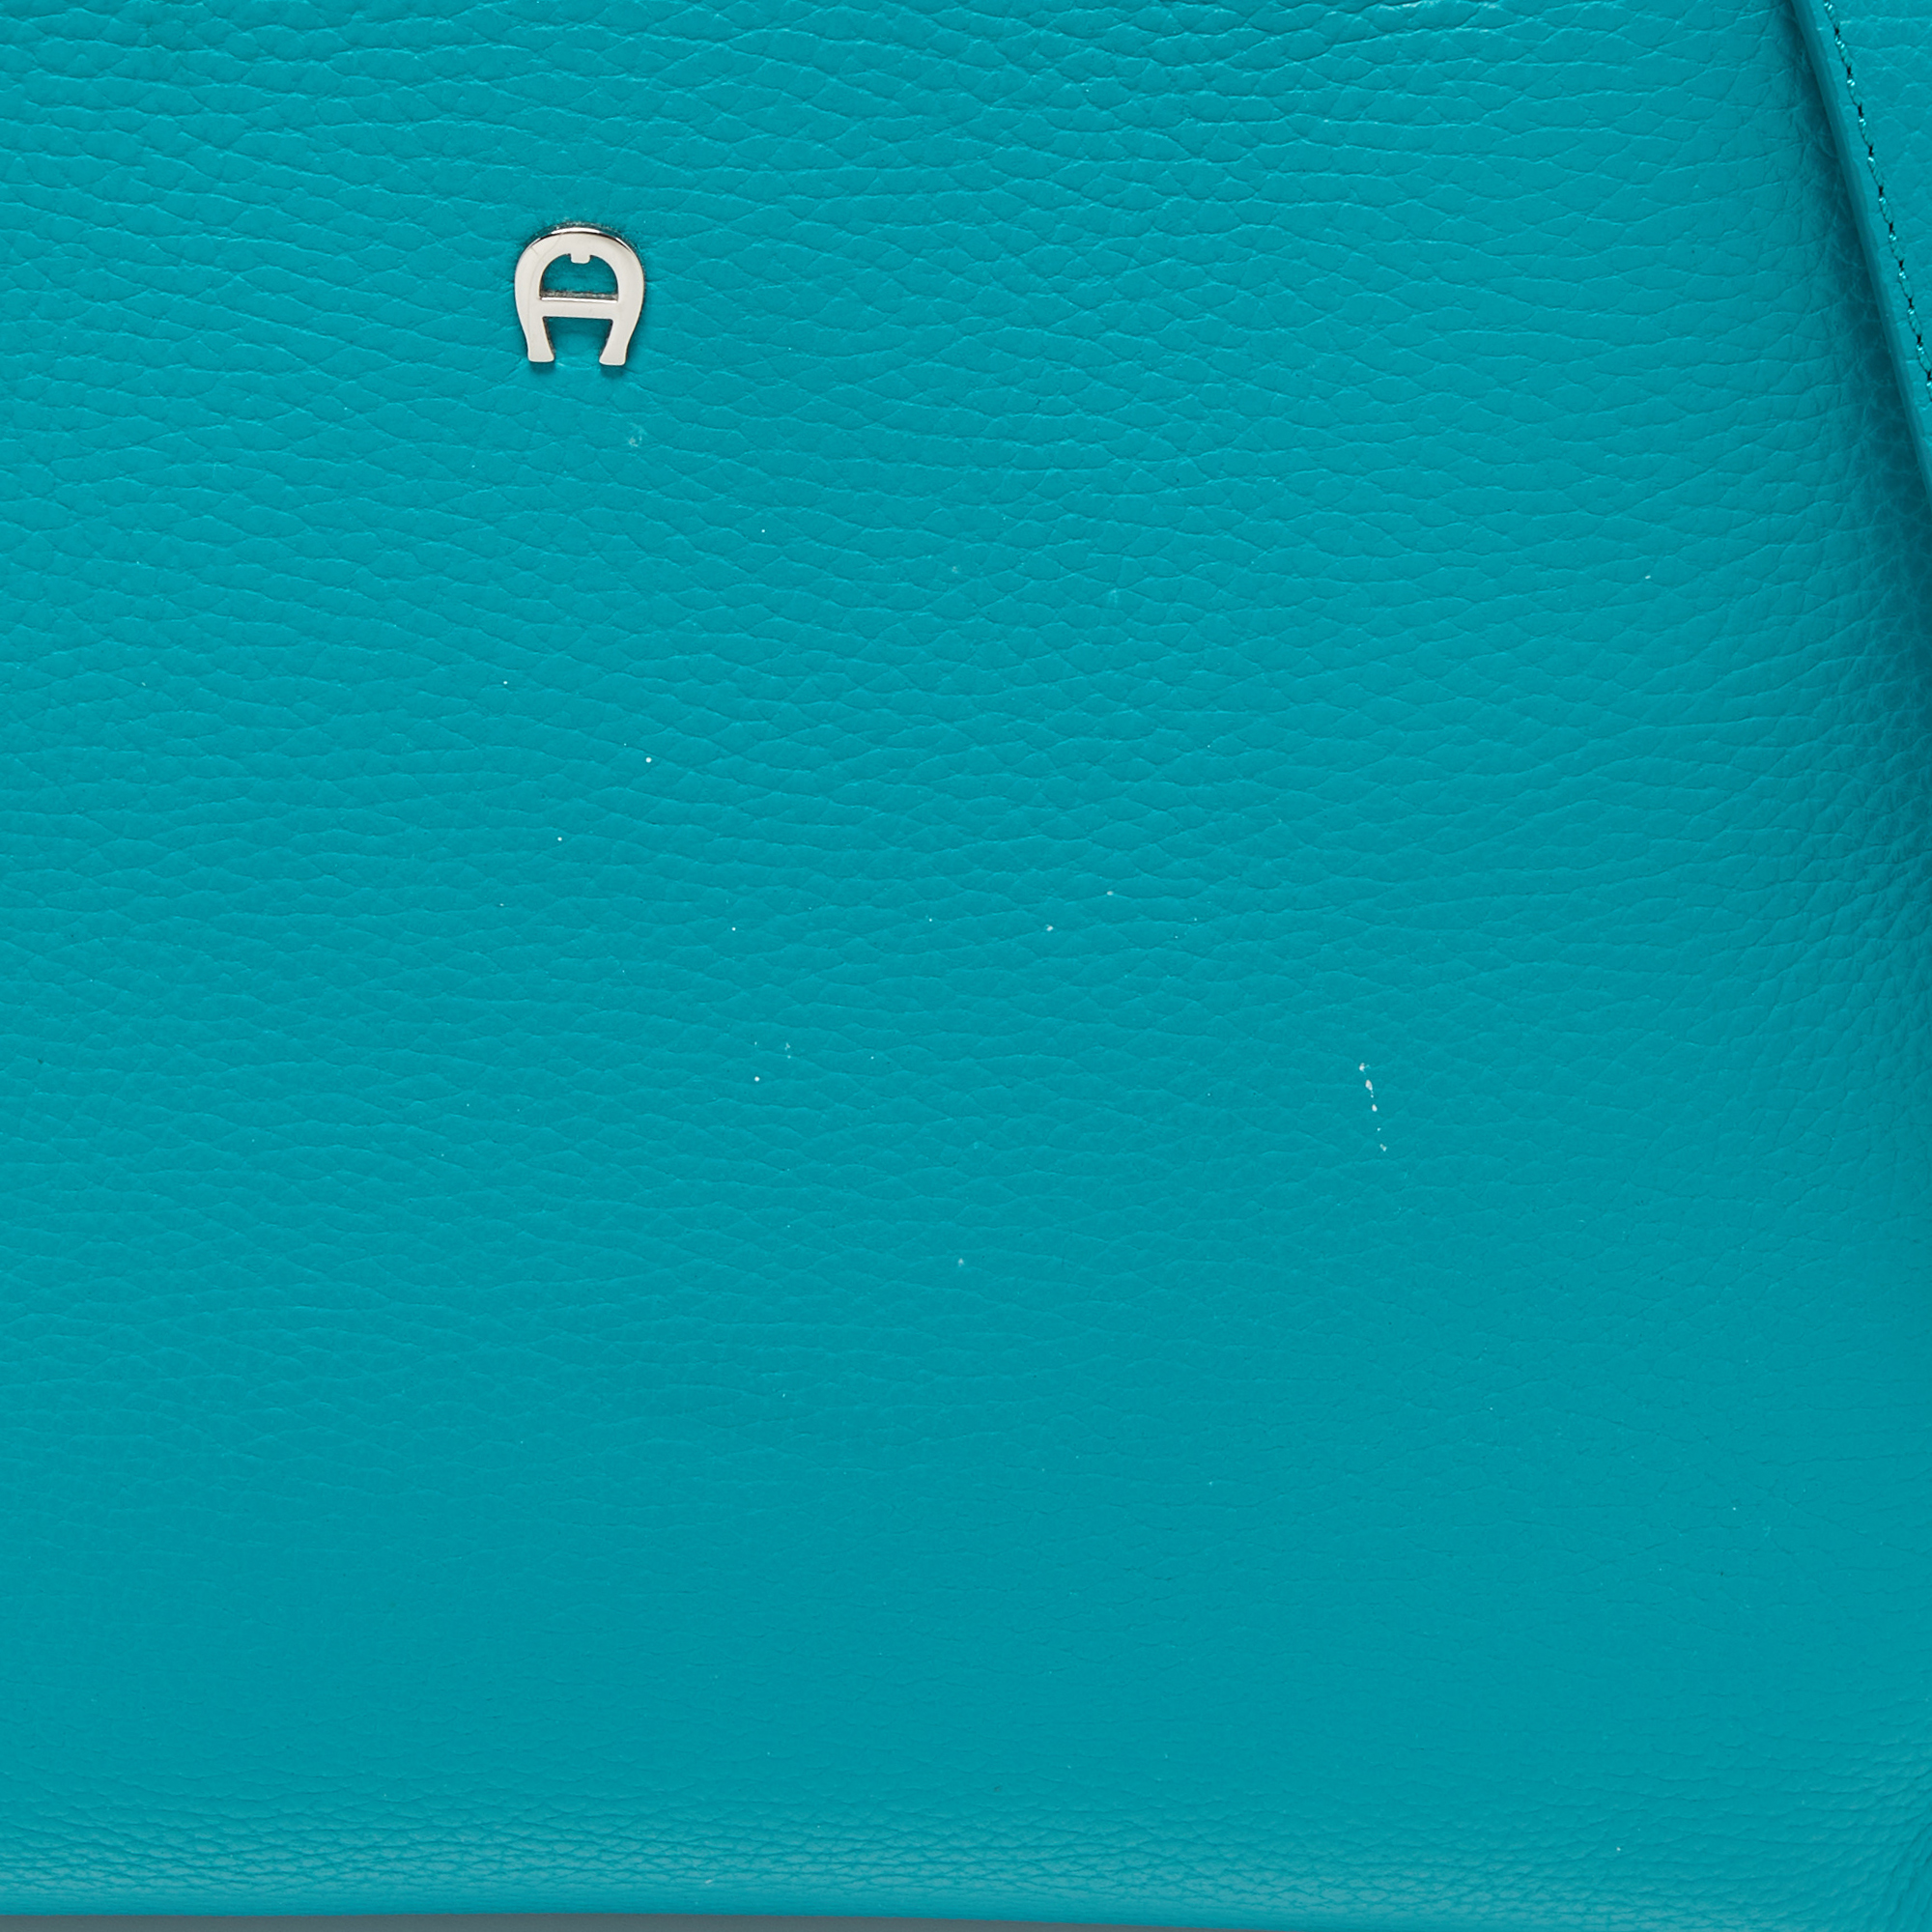 Aigner Teal Green Leather Satchel